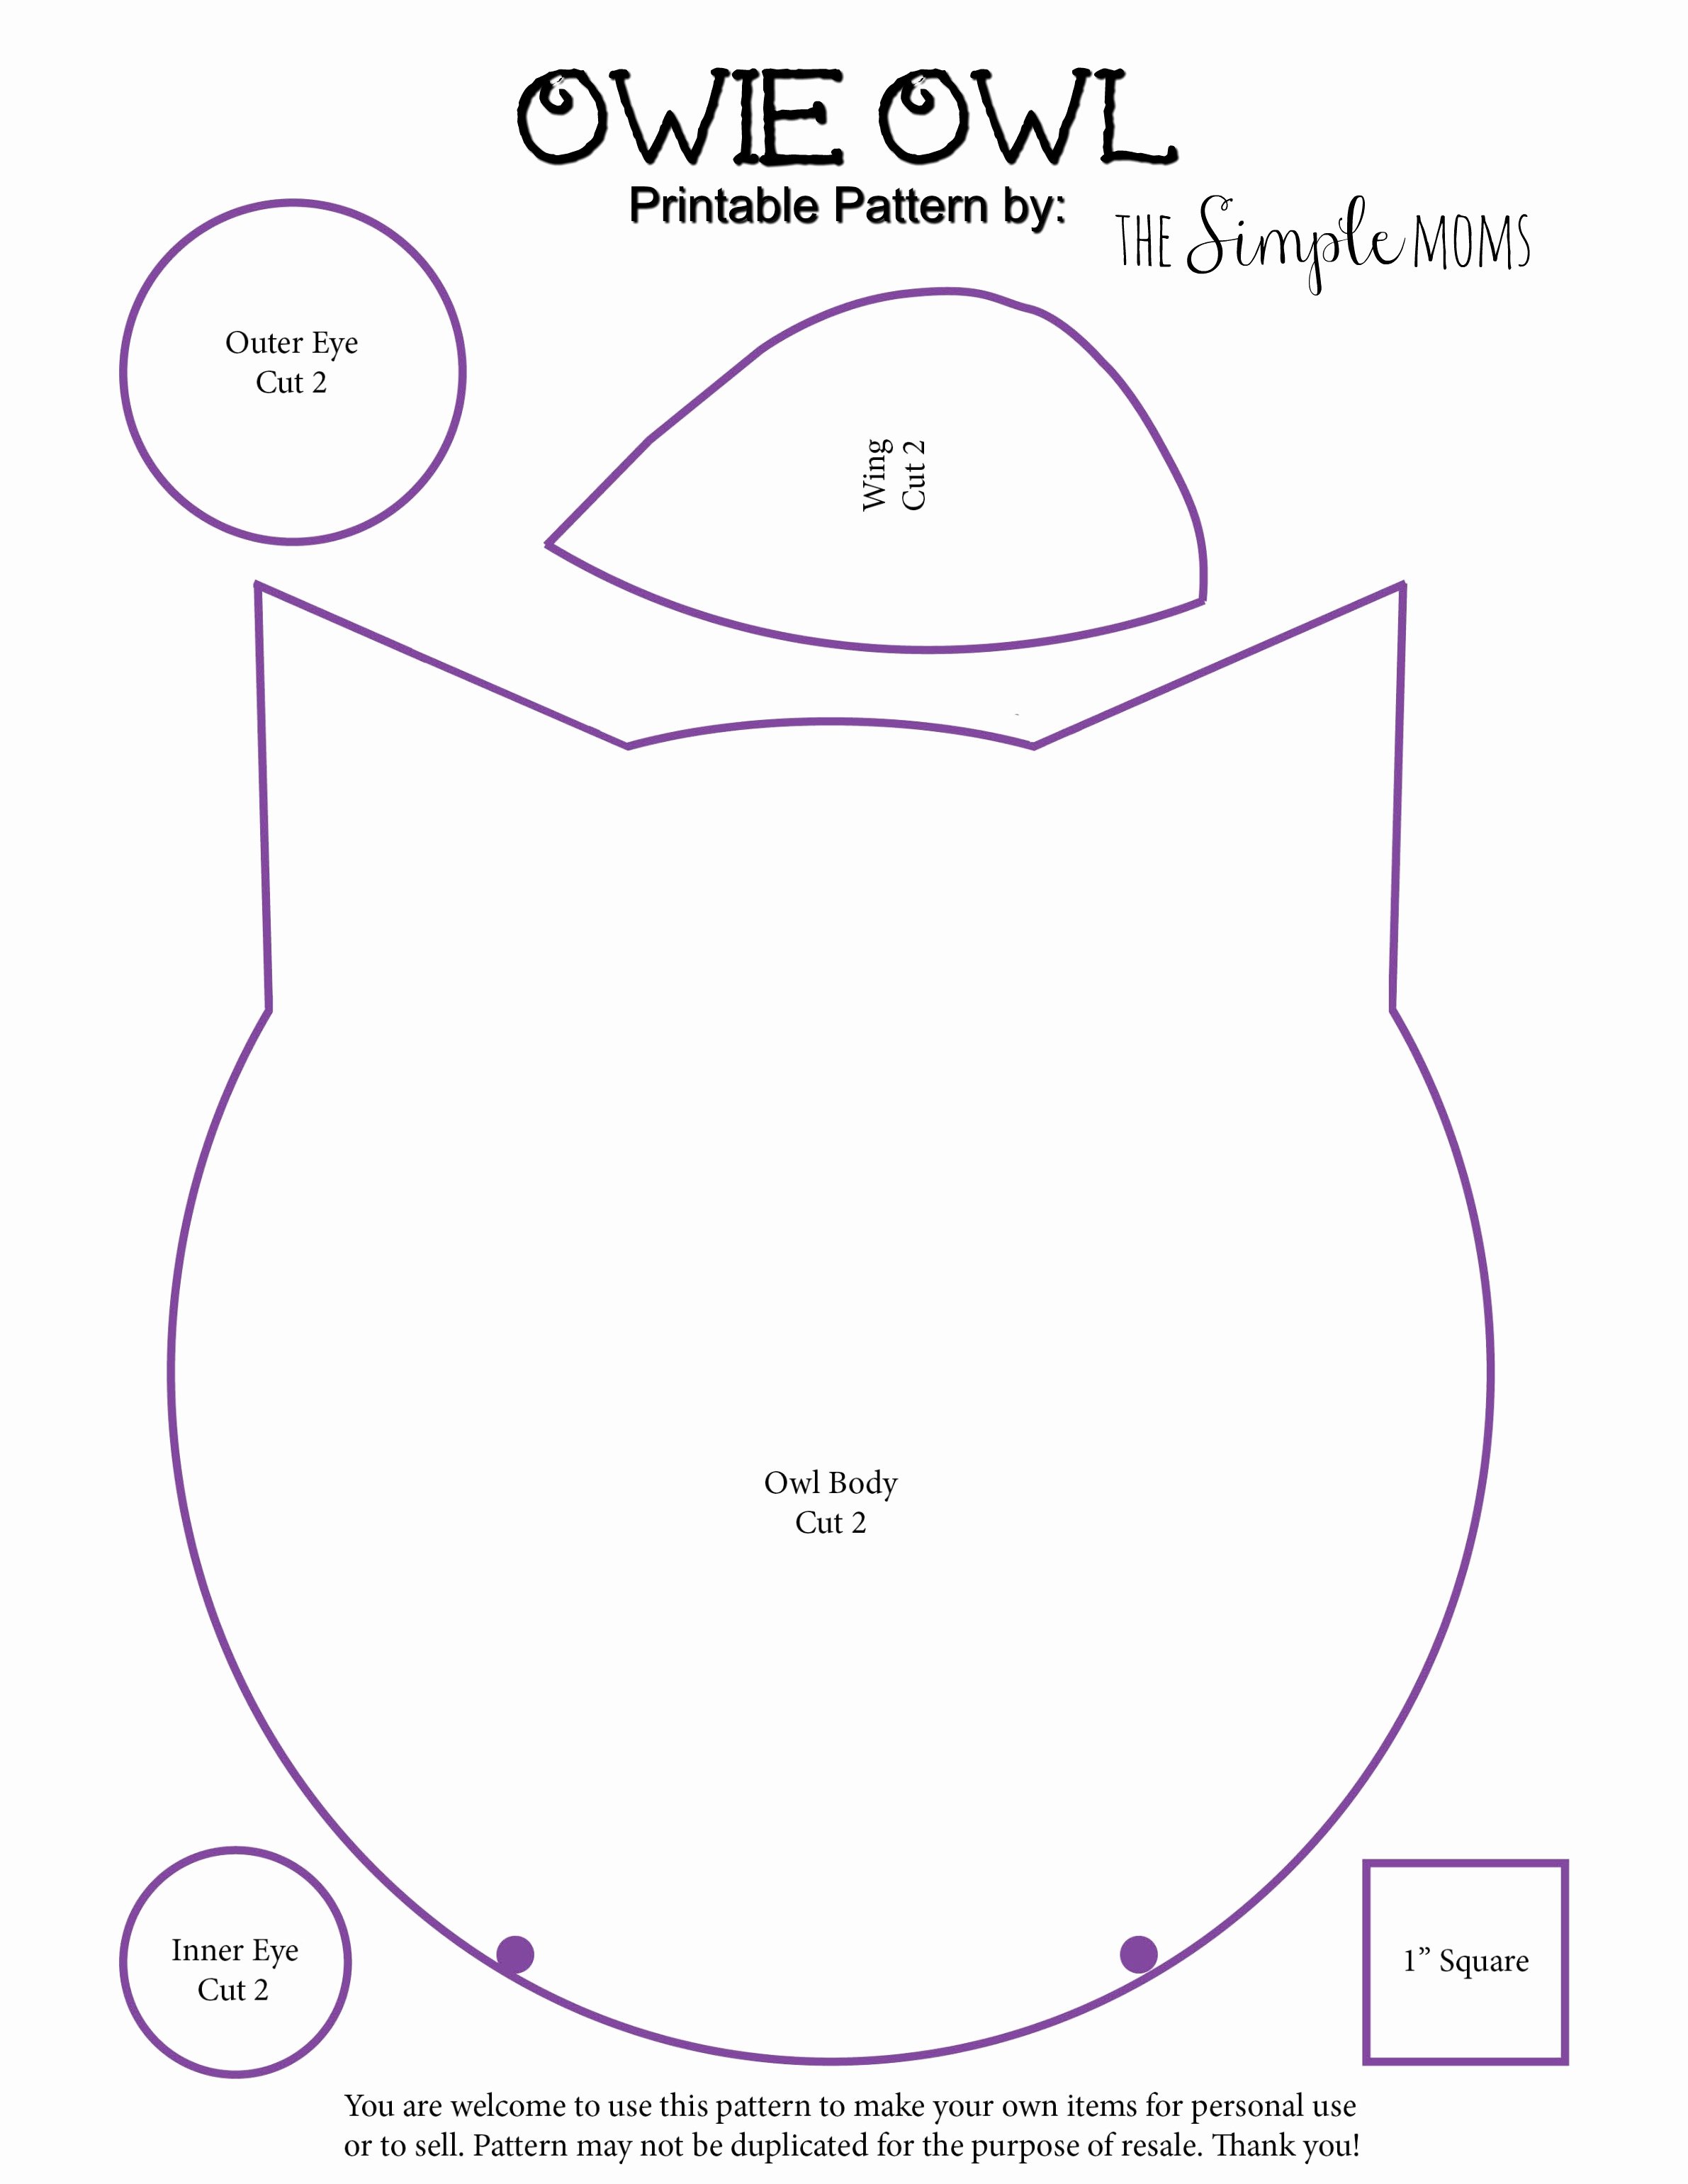 Free Printable Owl Template Awesome Diy Owie Owl Rice Pack Printable Pattern A Simple